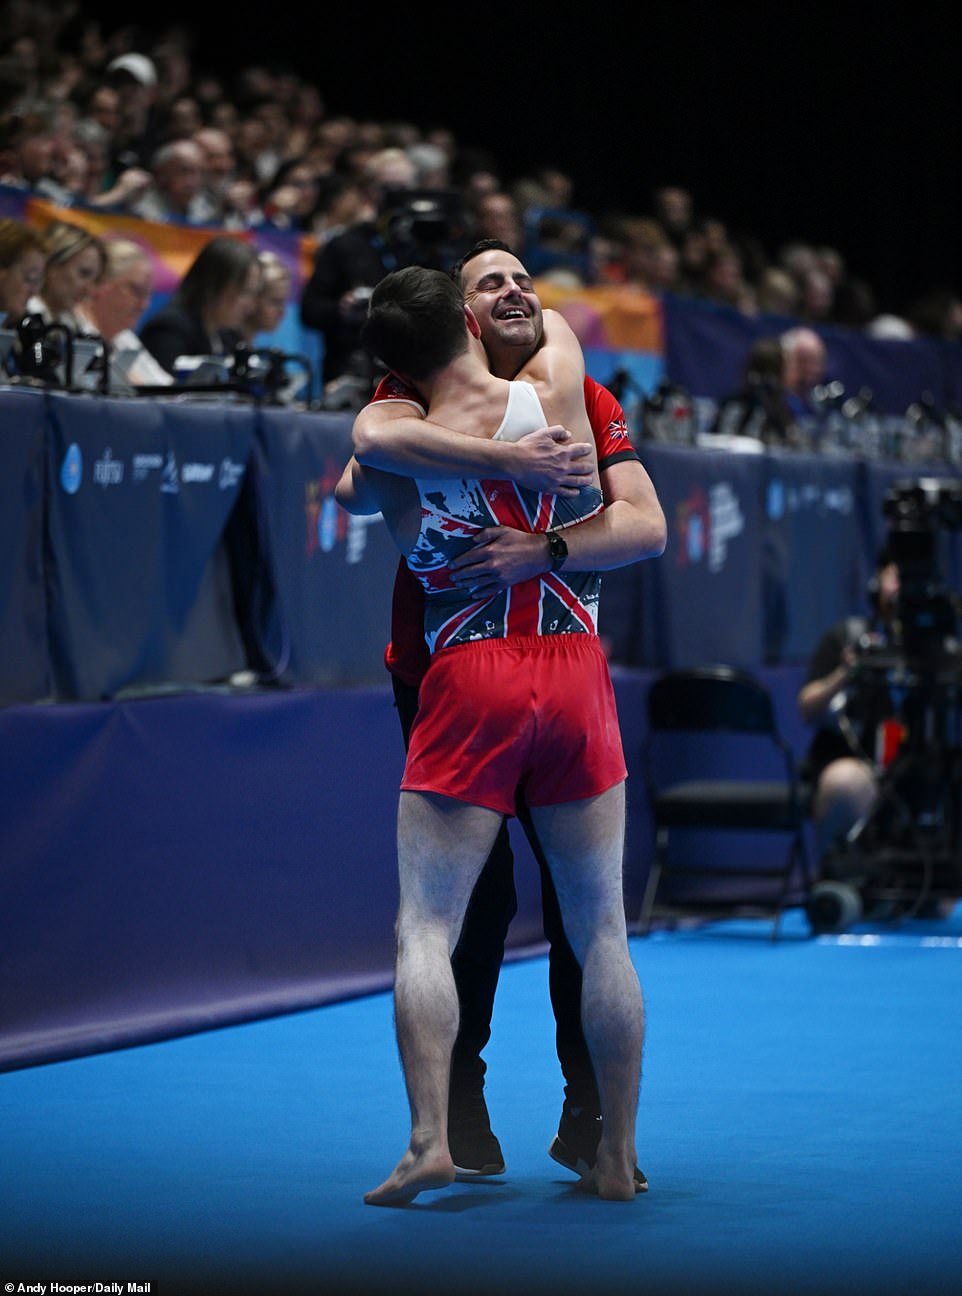 Two athletes are overjoyed after claiming silver to support Team GB's medal win as they embrace in an emotional moment